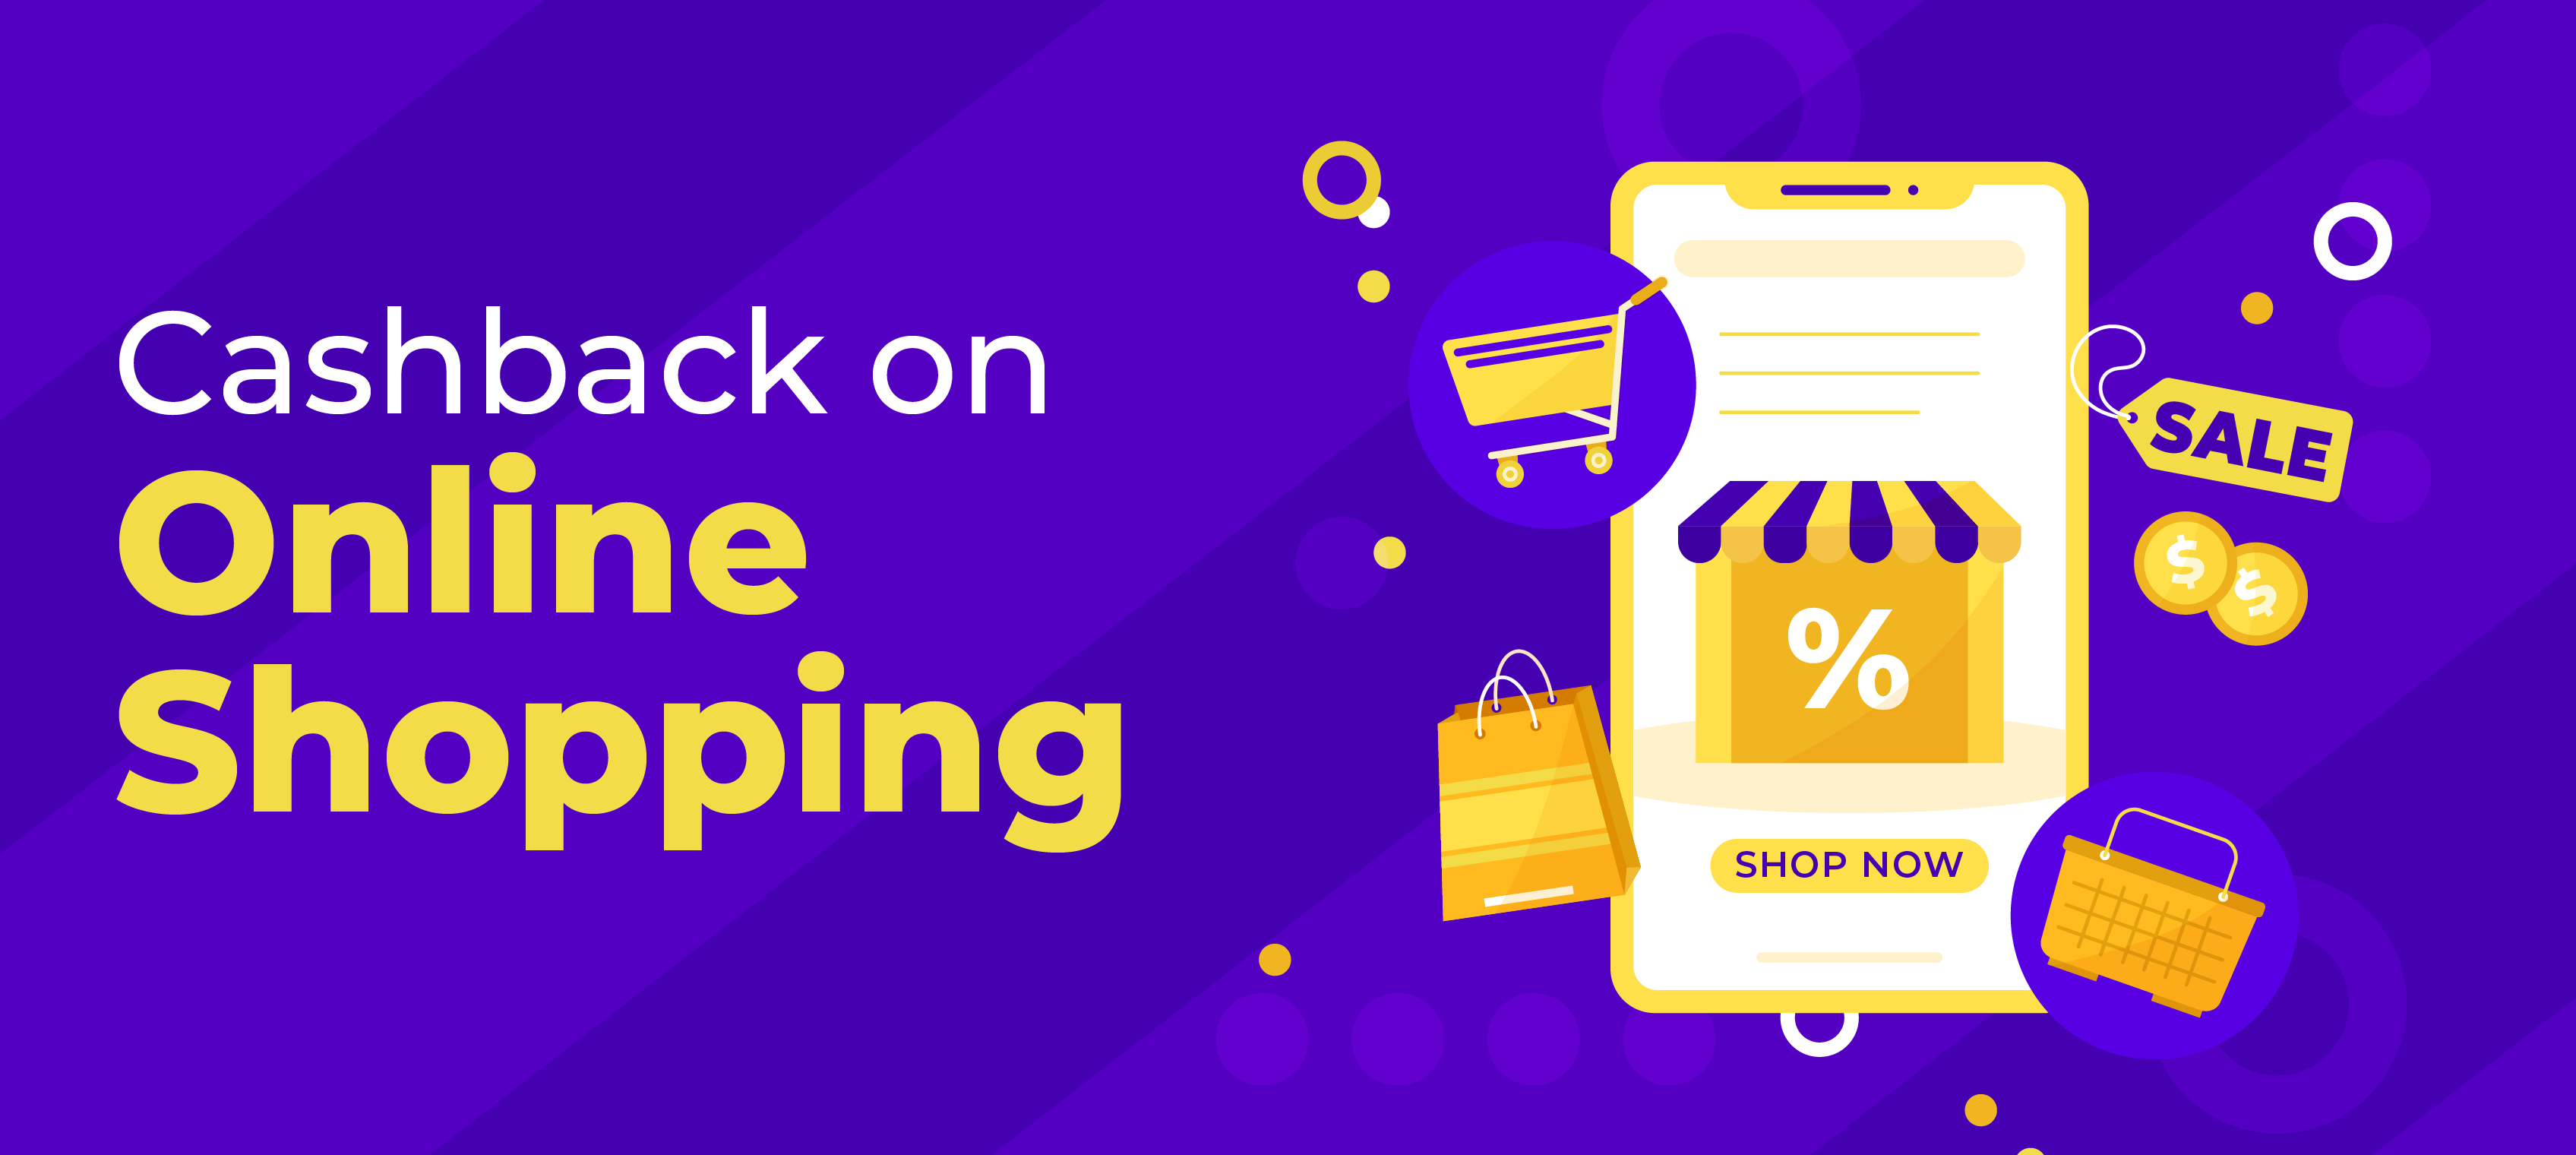 Save with Cashback on Online Shopping